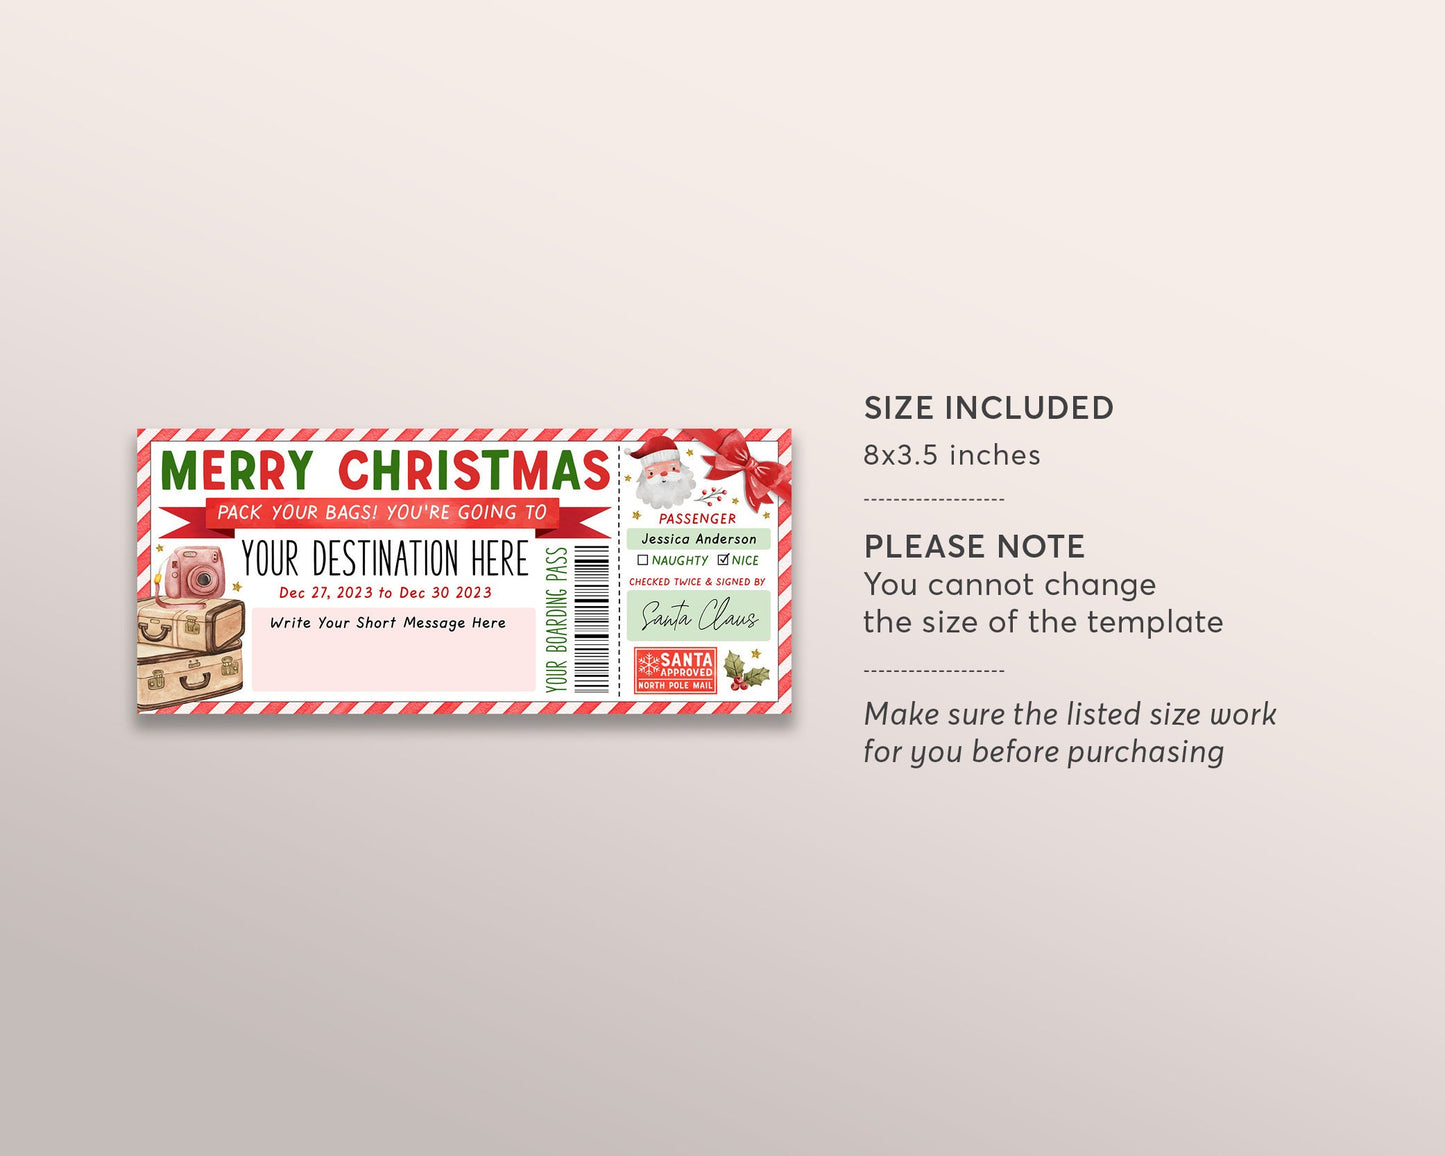 Boarding Pass from Santa Gift Ticket Editable Template, Christmas Xmas Surprise Vacation for Kids, Holiday Trip Reveal Gift Travel Ticket